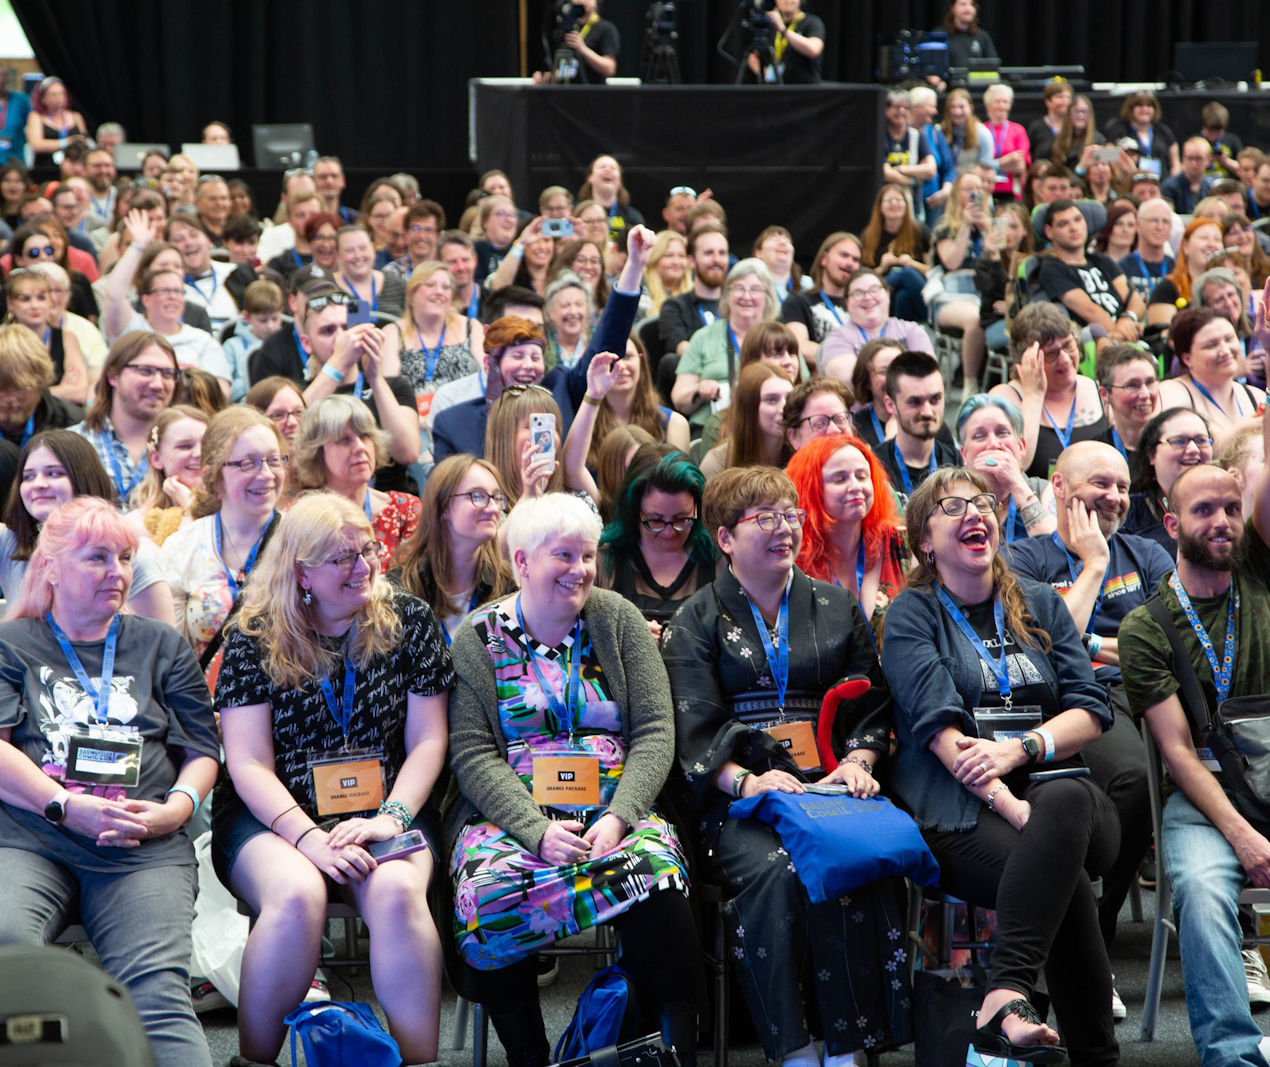 The crowd at Basingstoke Comic Con 2022